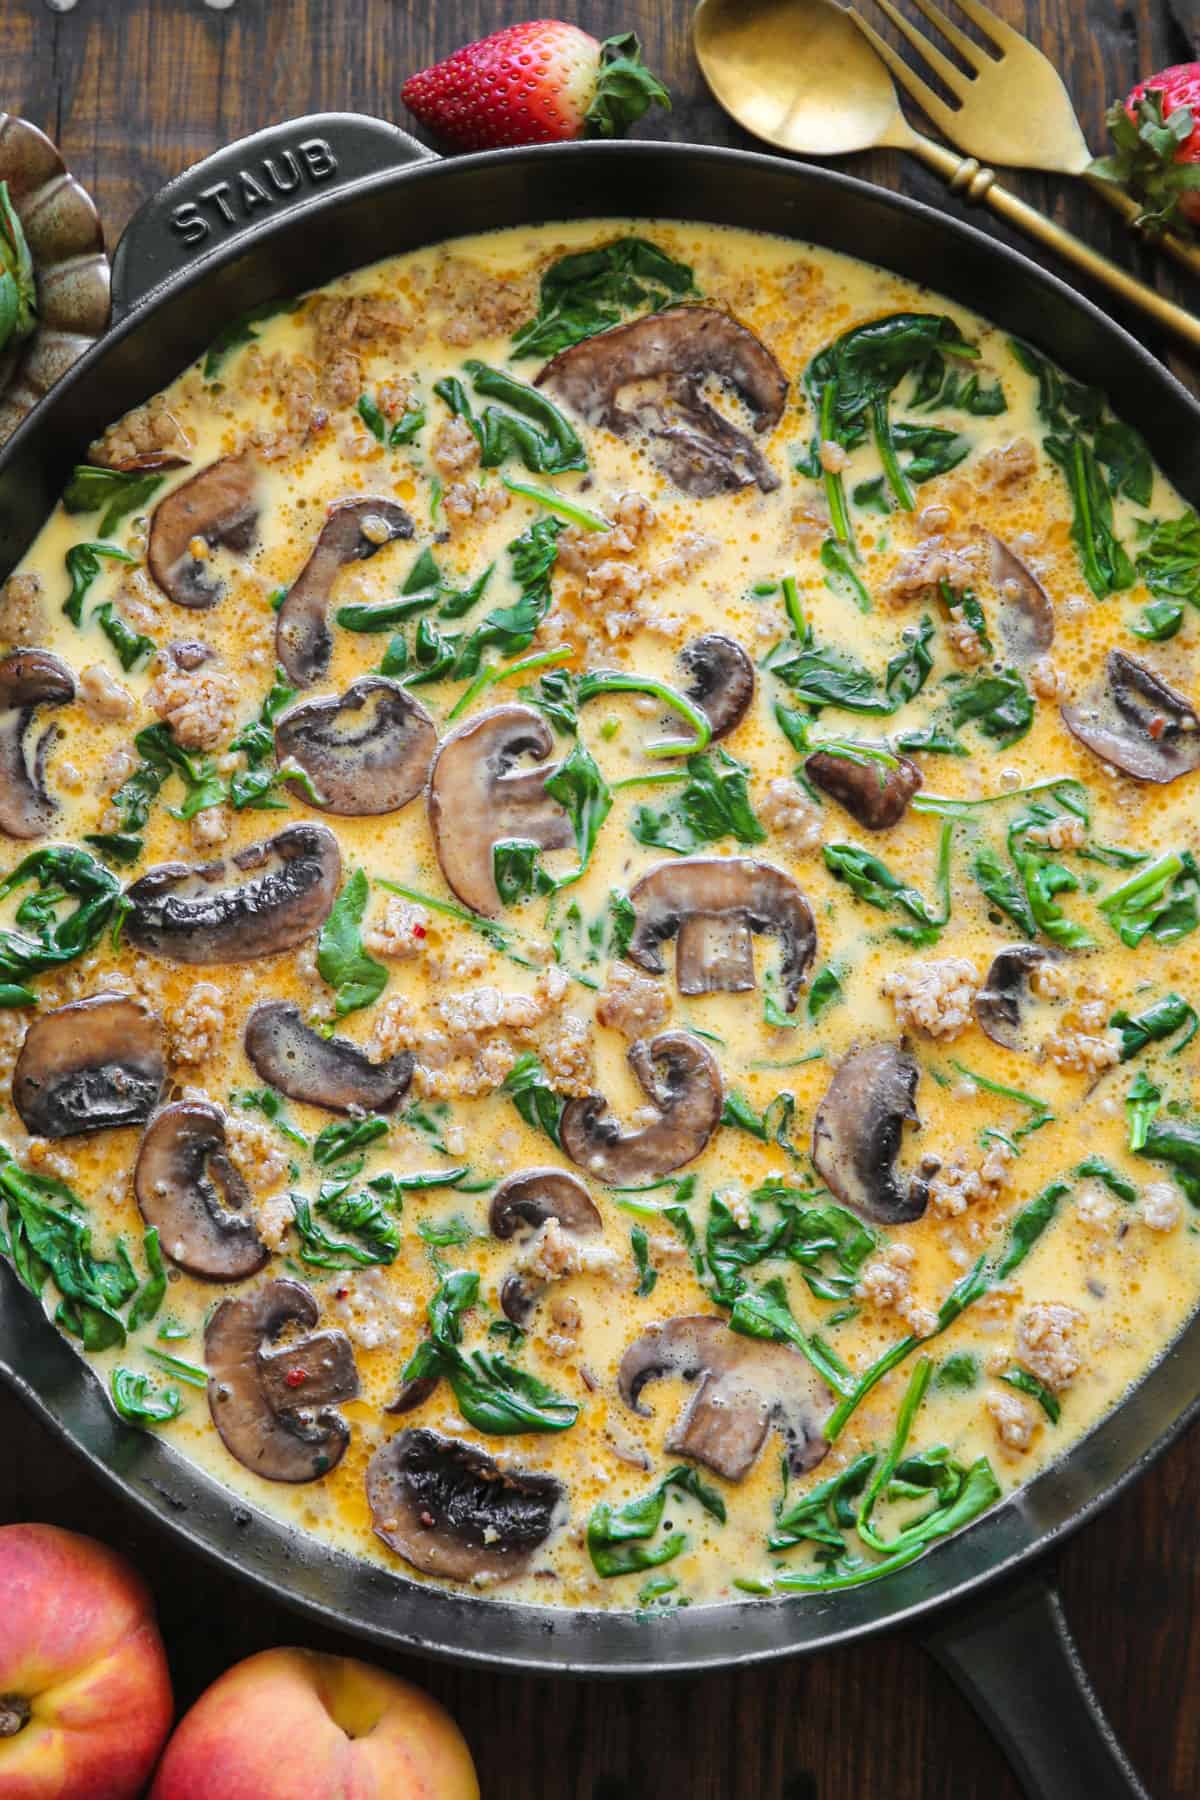 frittata ingredients (crumbled sausage, mushrooms, spinach, and eggs) in a cast iron skillet.